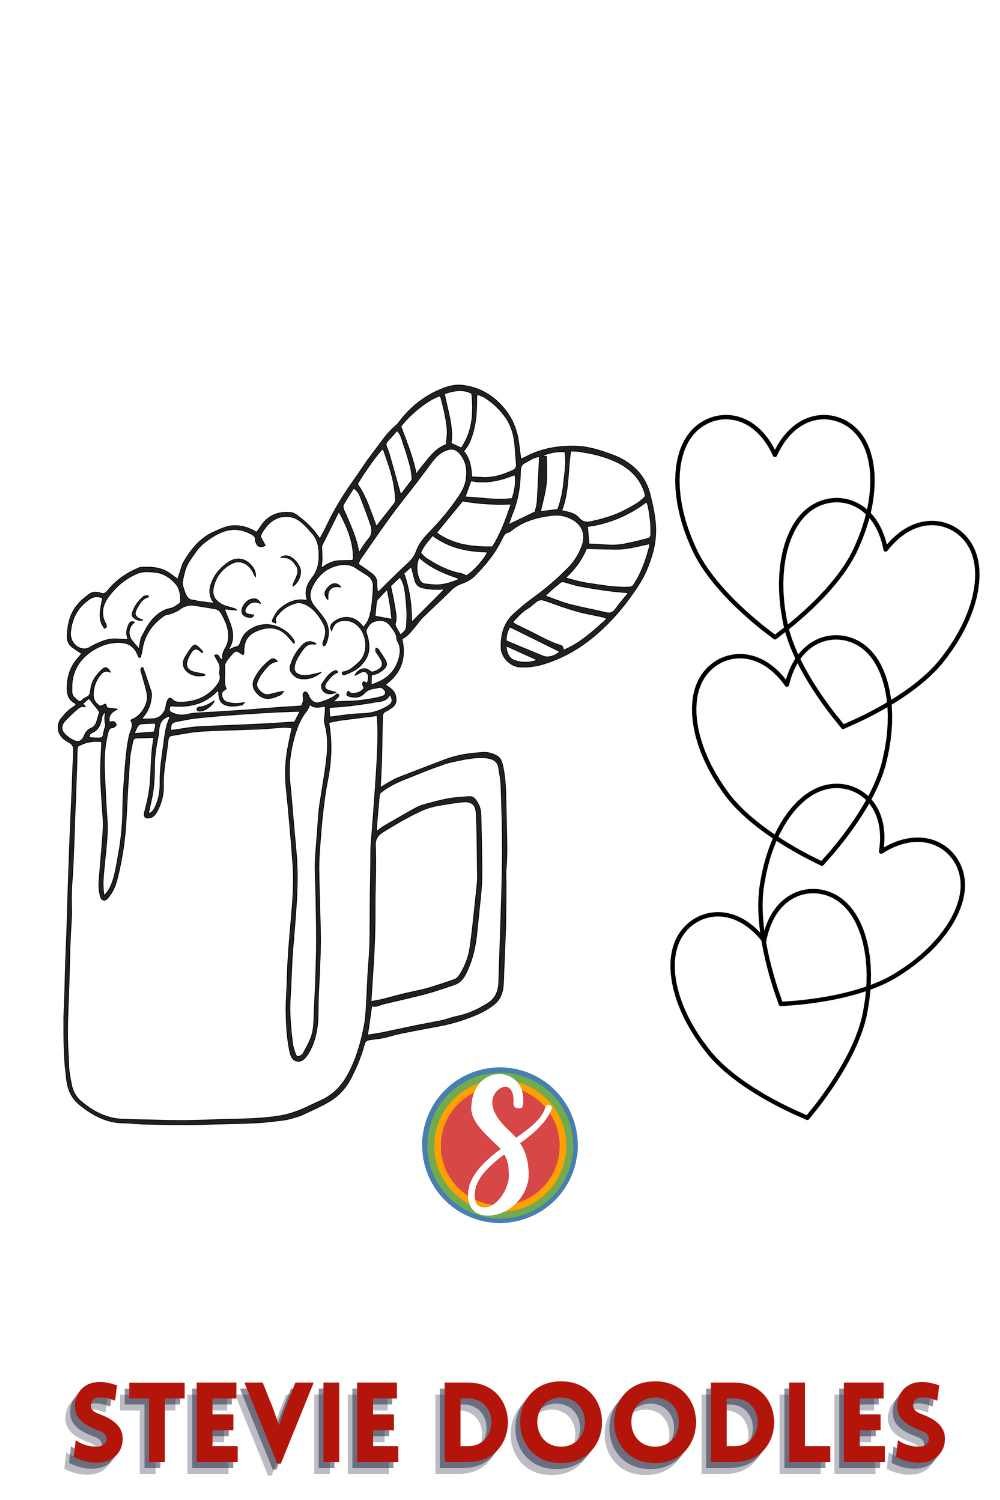 cocoa cup with candy cane on the left, a chain of hearts on the right, a coloring page